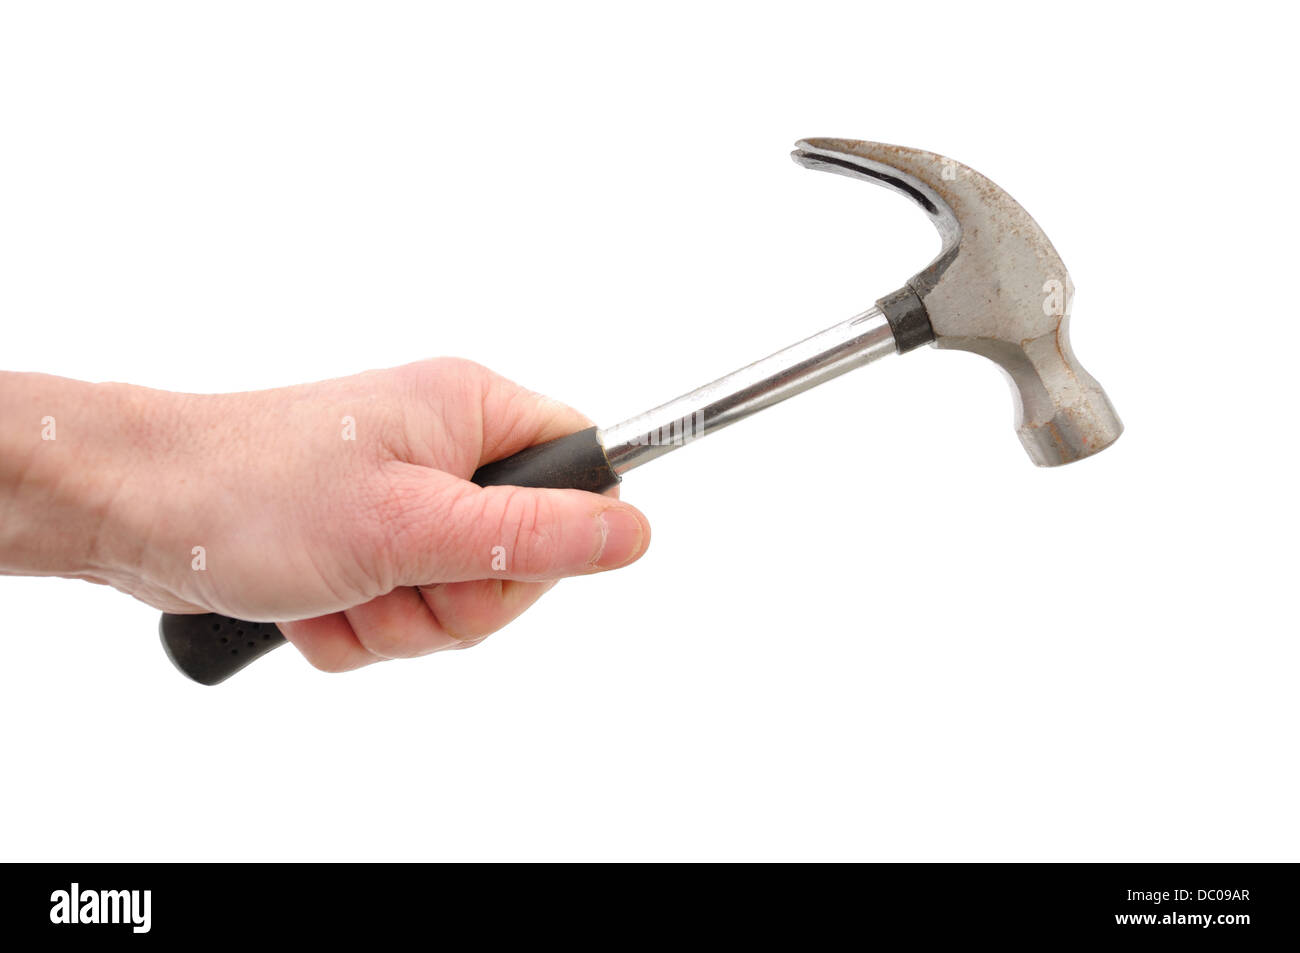 Hand using / holding a hammer Stock Photo